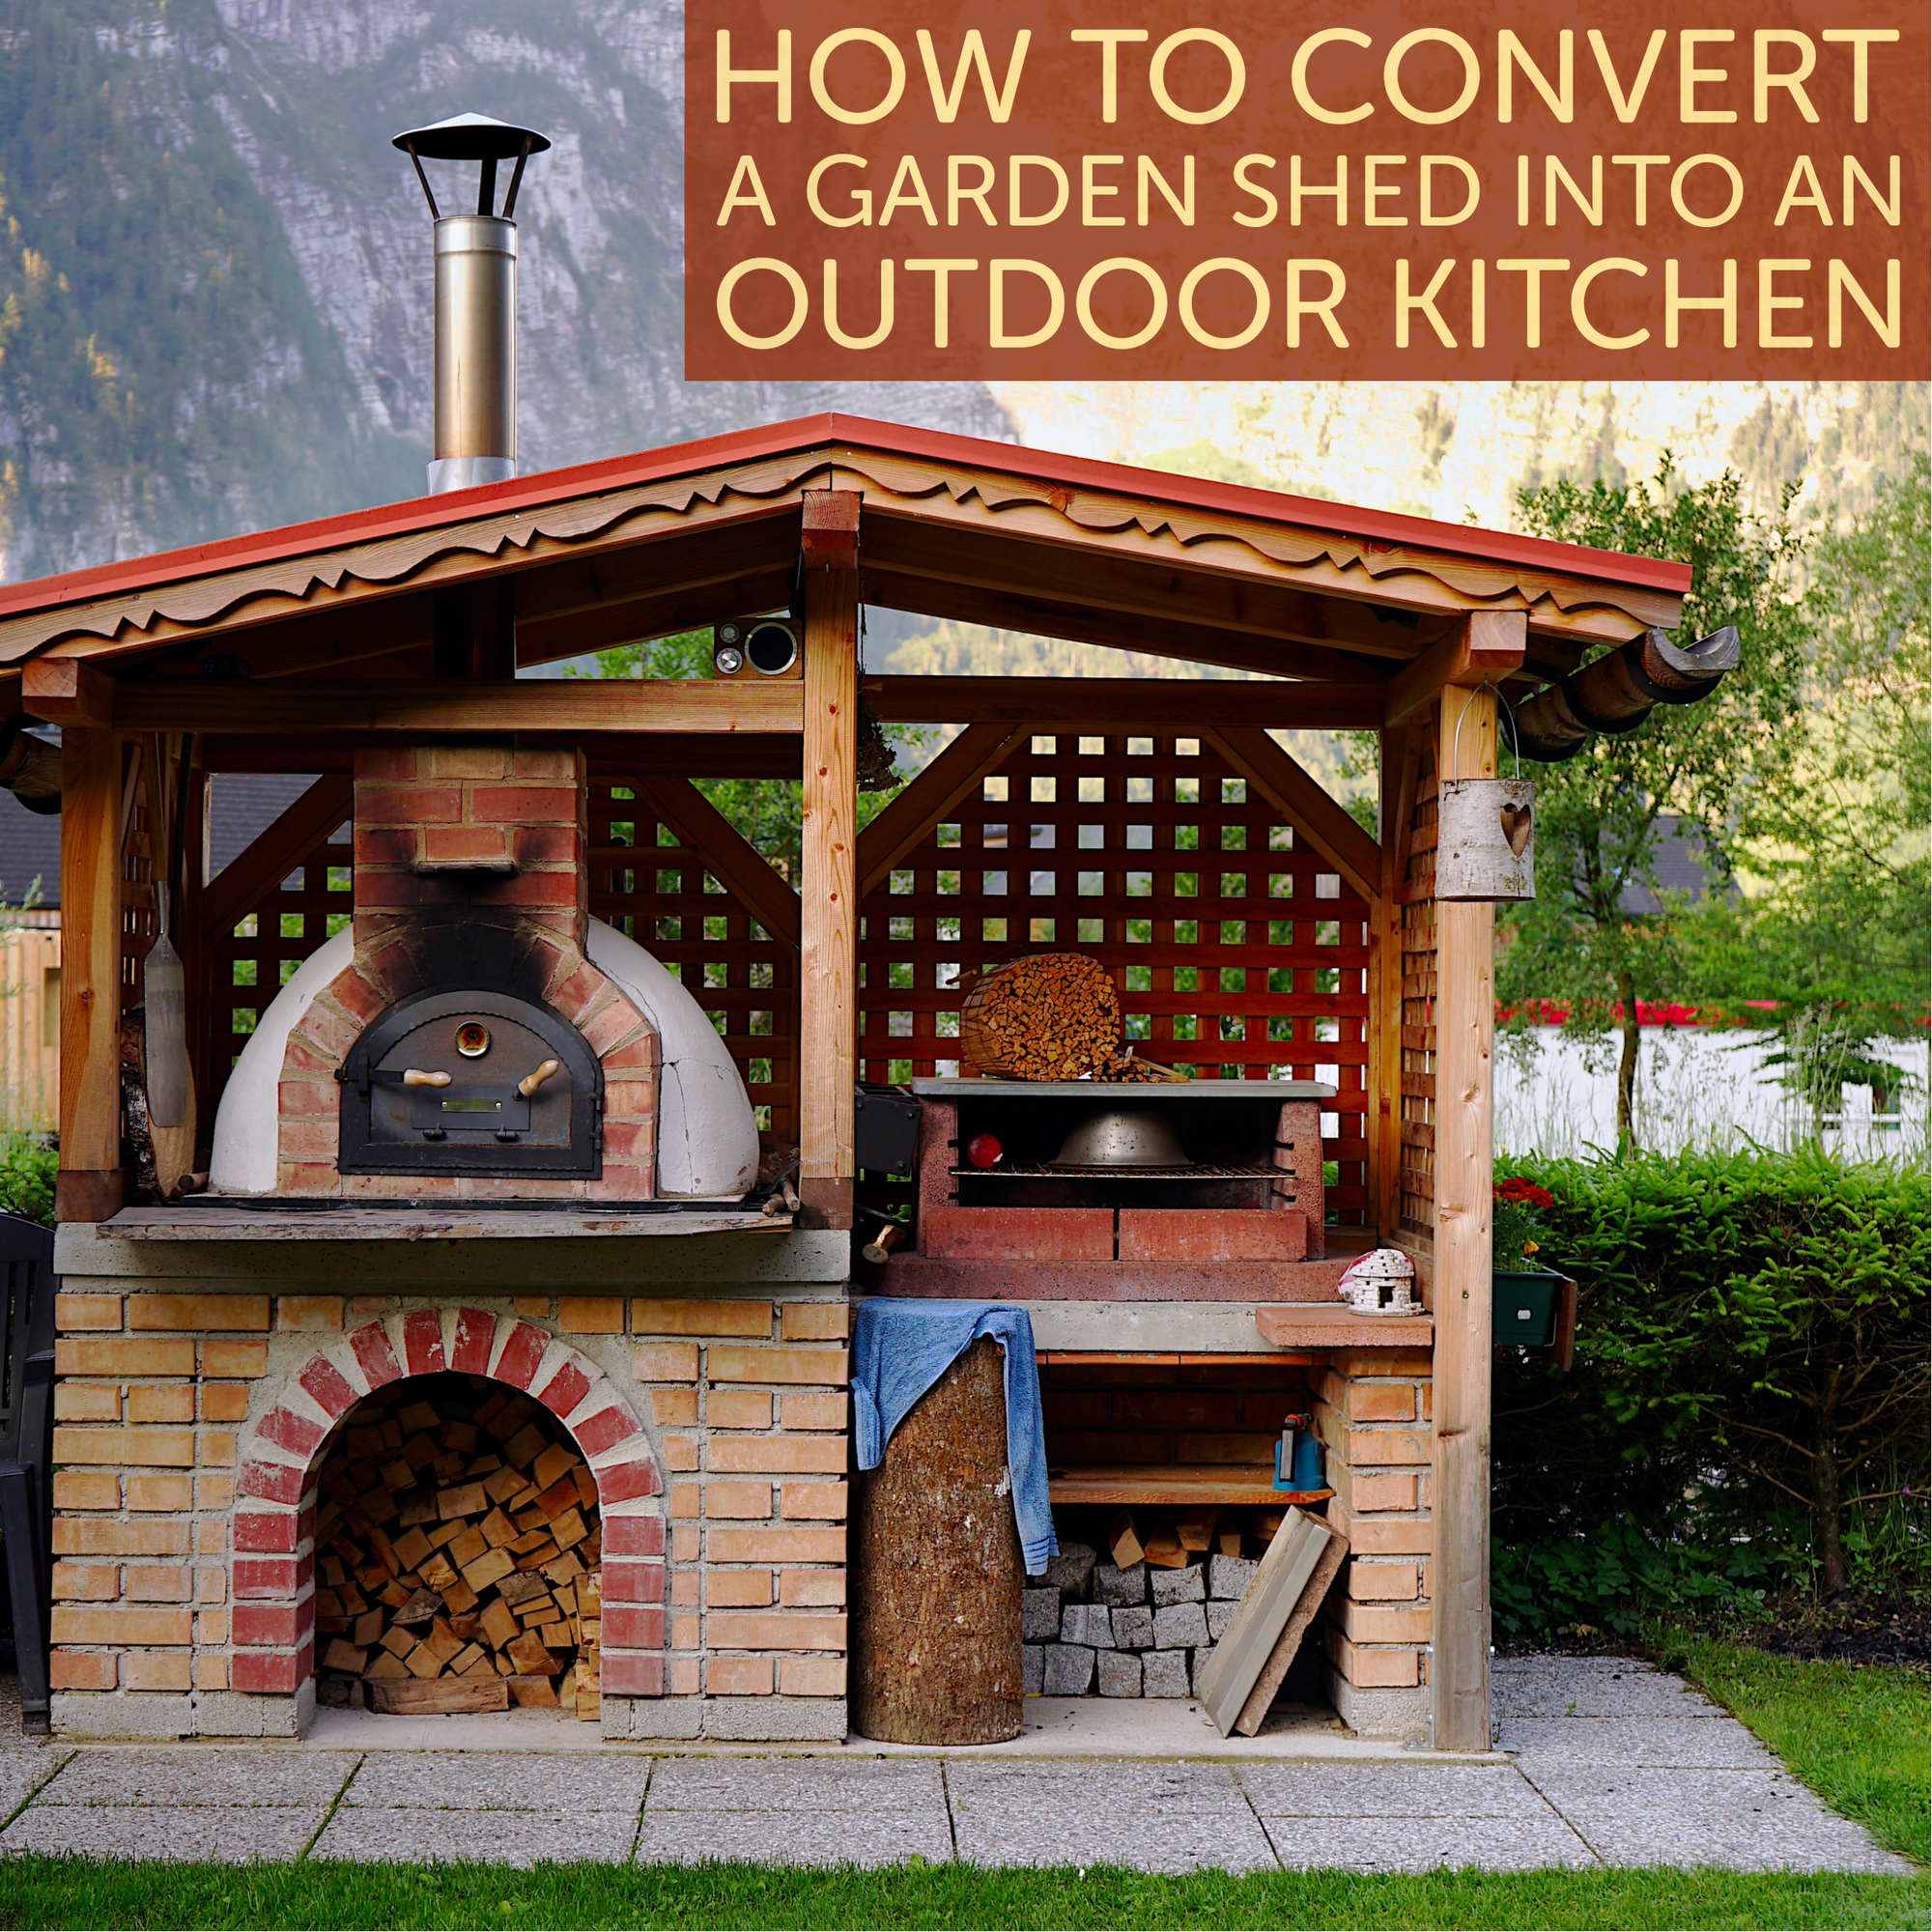 How to Convert A Garden Shed Into An Outdoor Kitchen